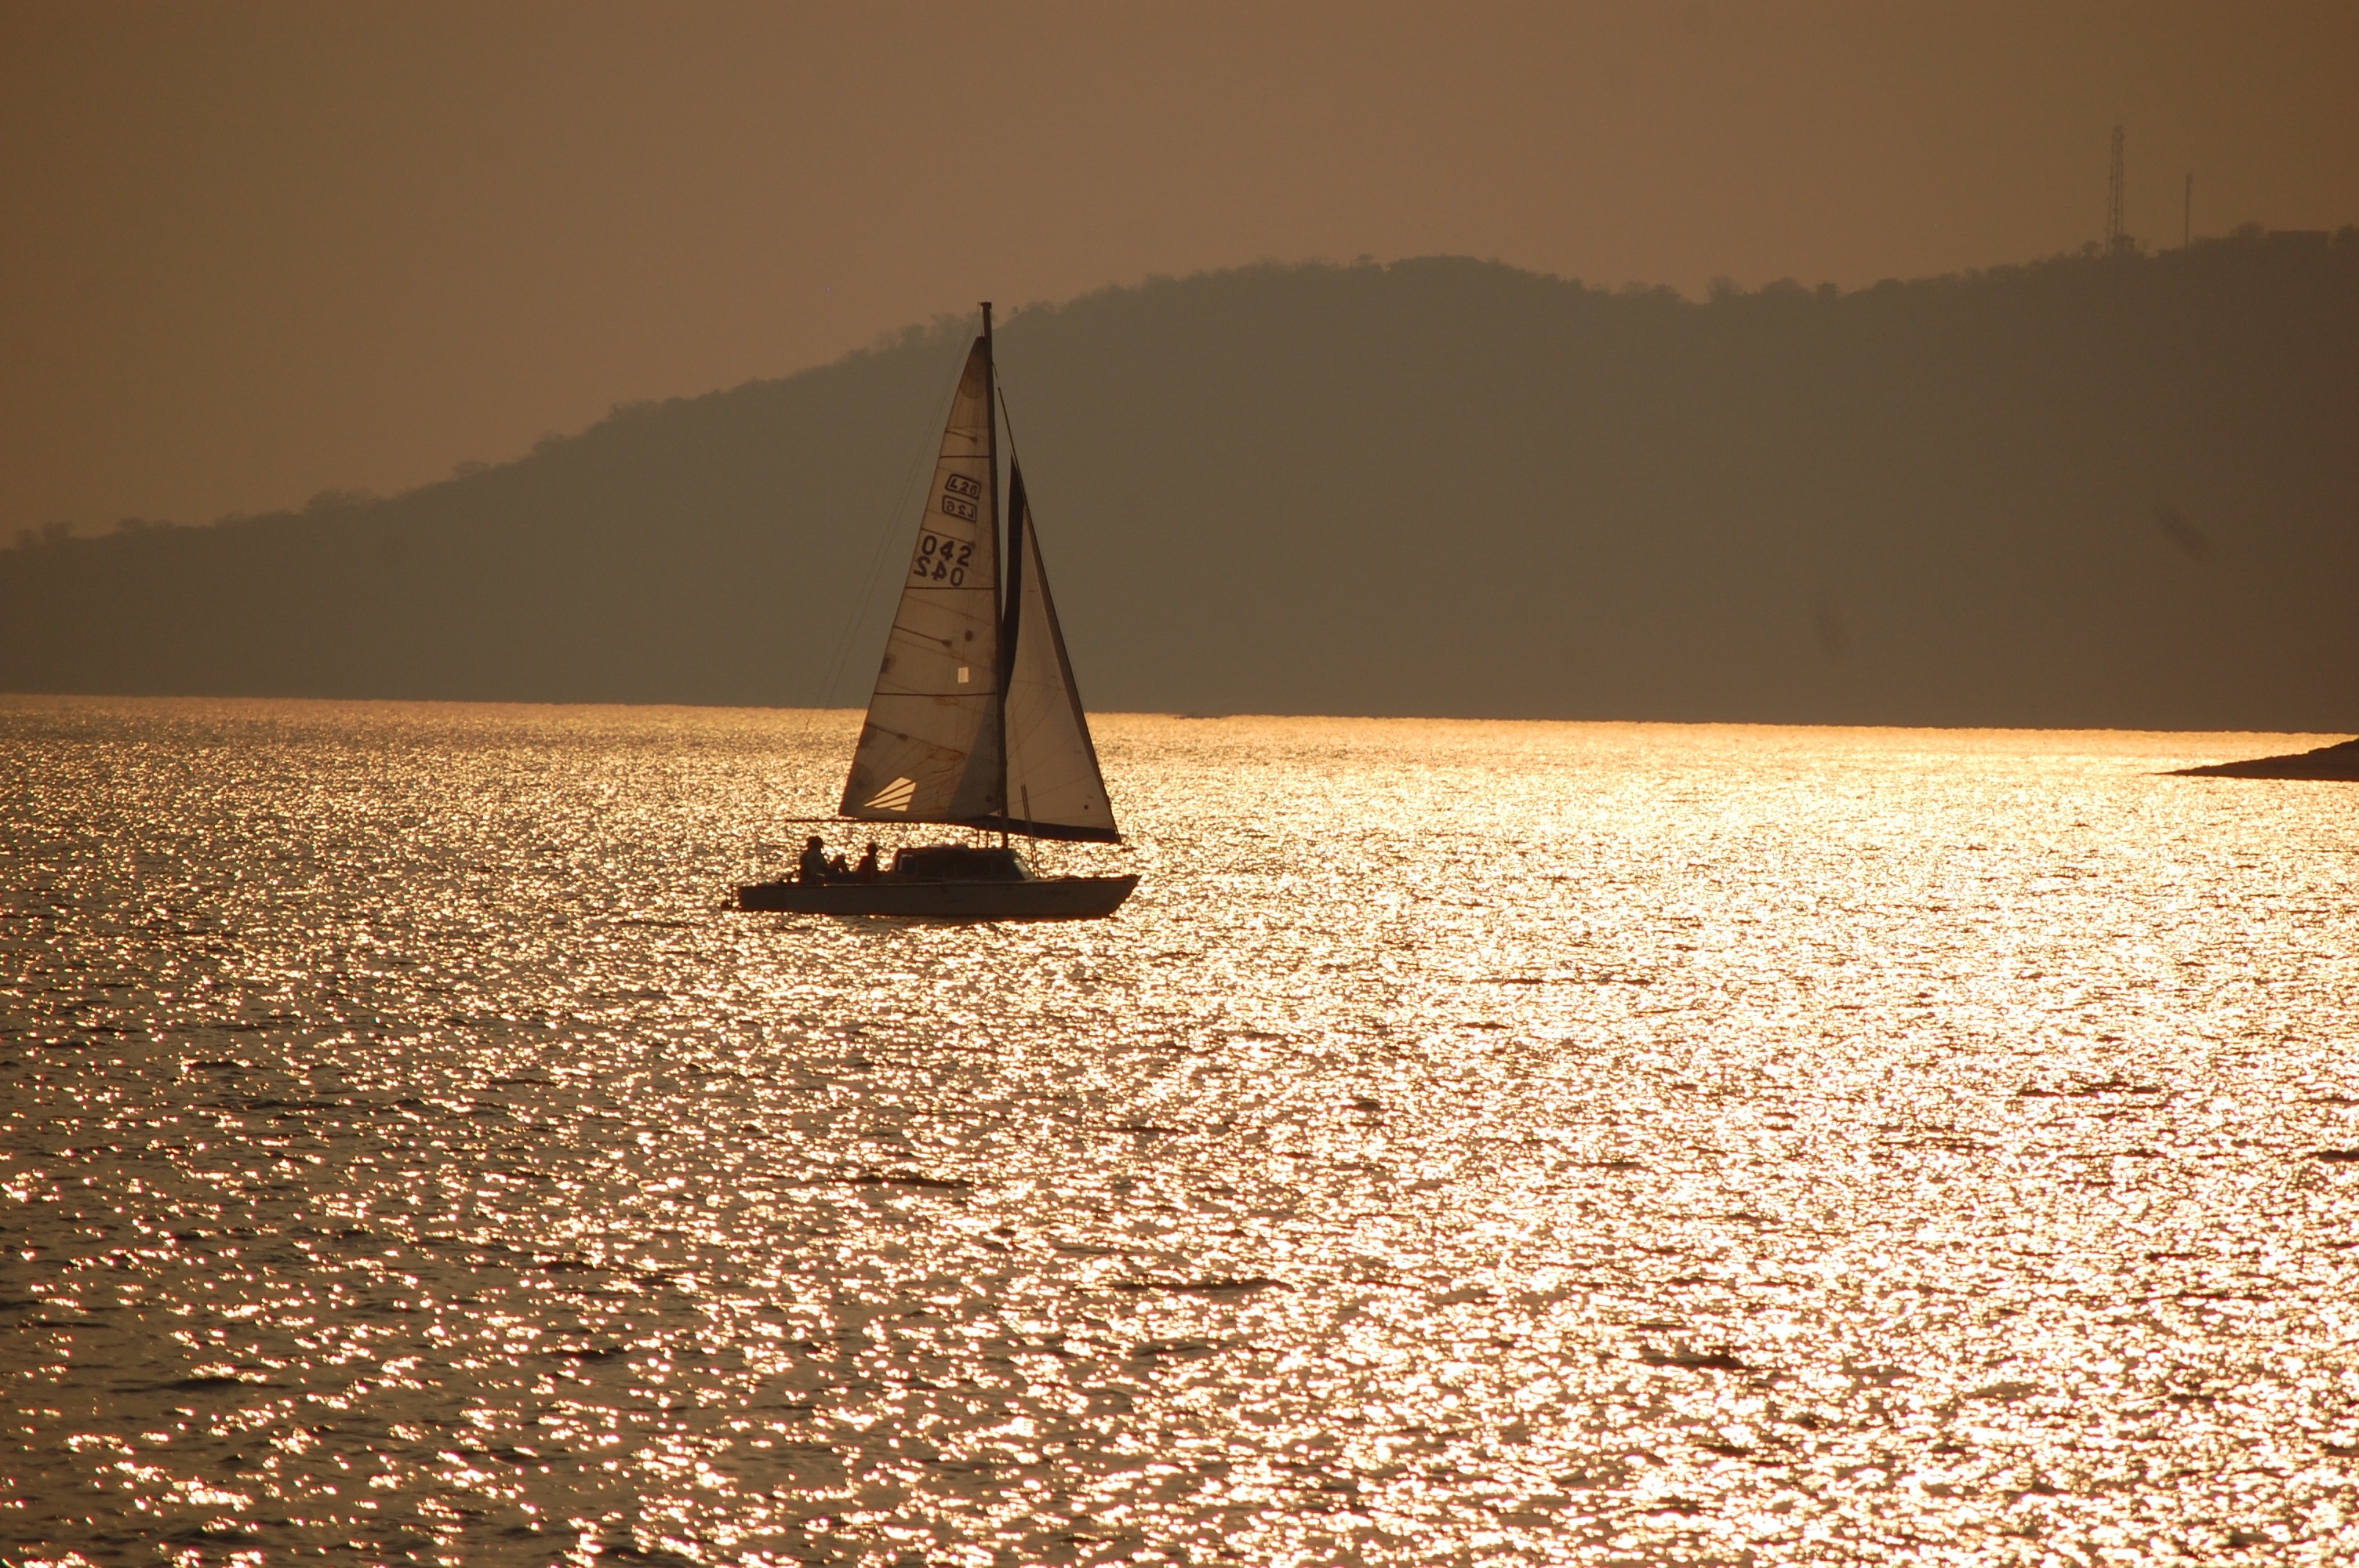 silhouette photo of sailboat on body of water